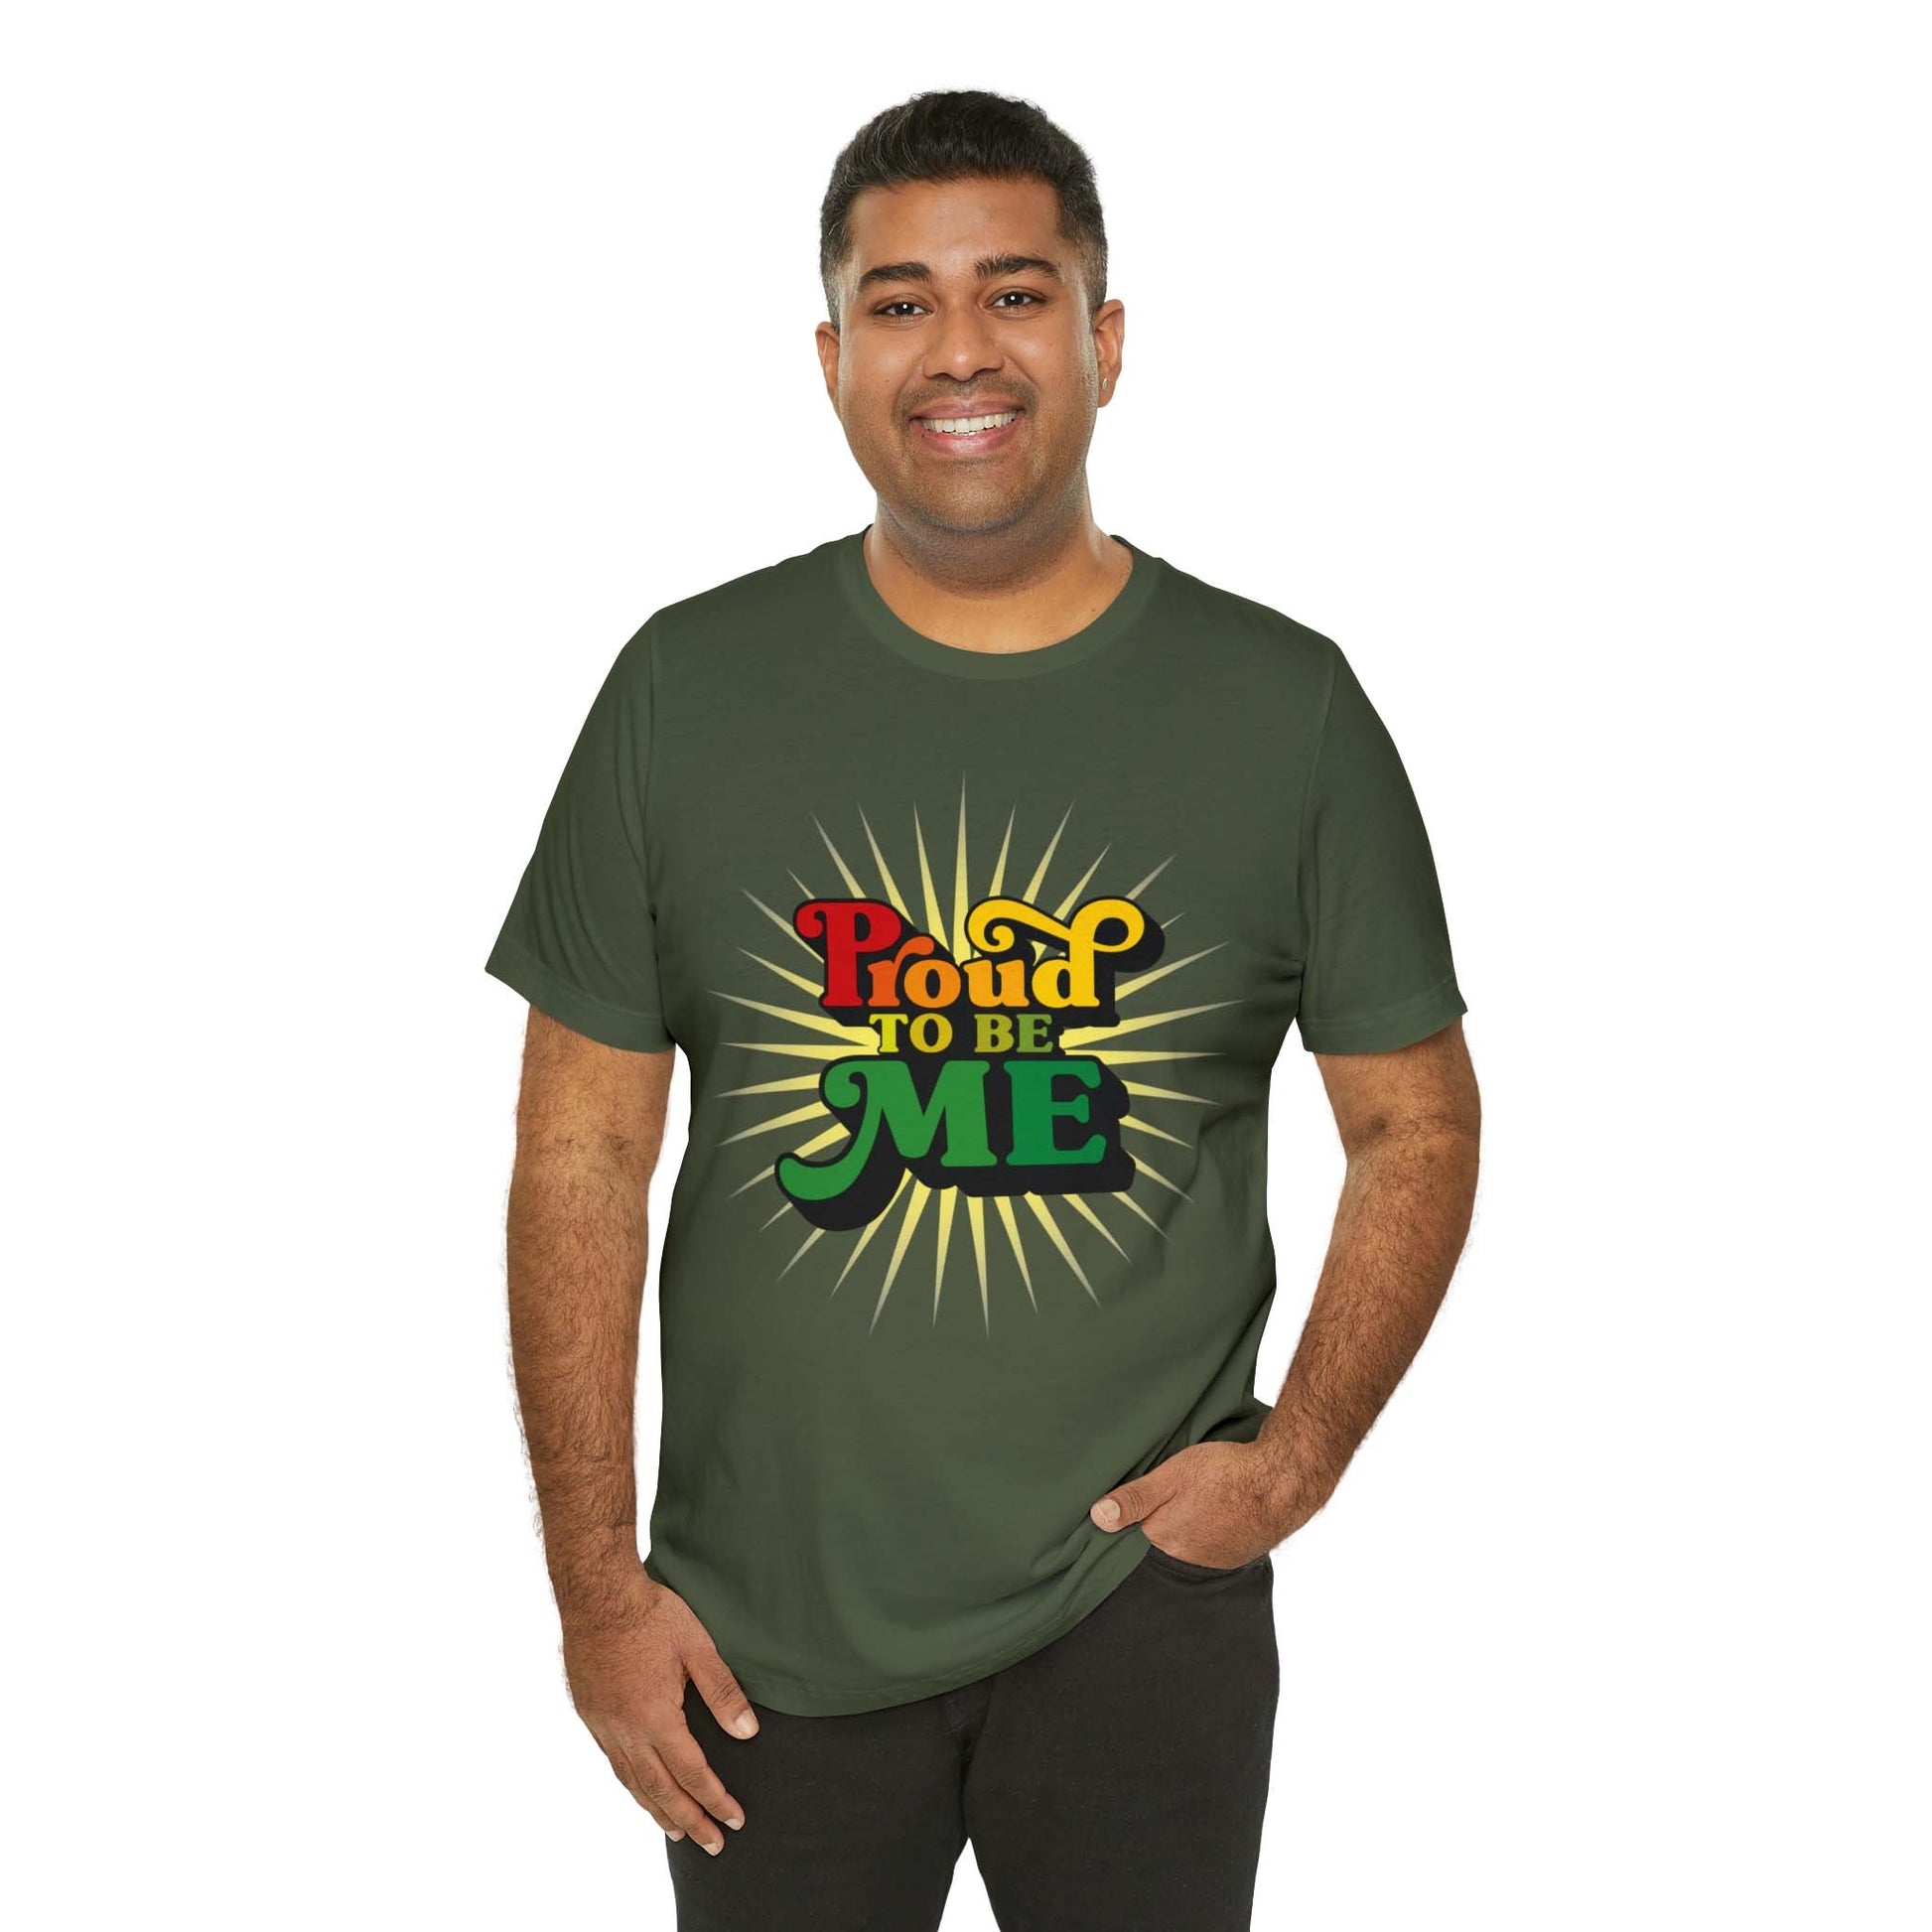 Are you proud of yourself and not afraid to show the world? This military green t-shirt has our PROUD TO BE ME meme printed at the front of the shirt.